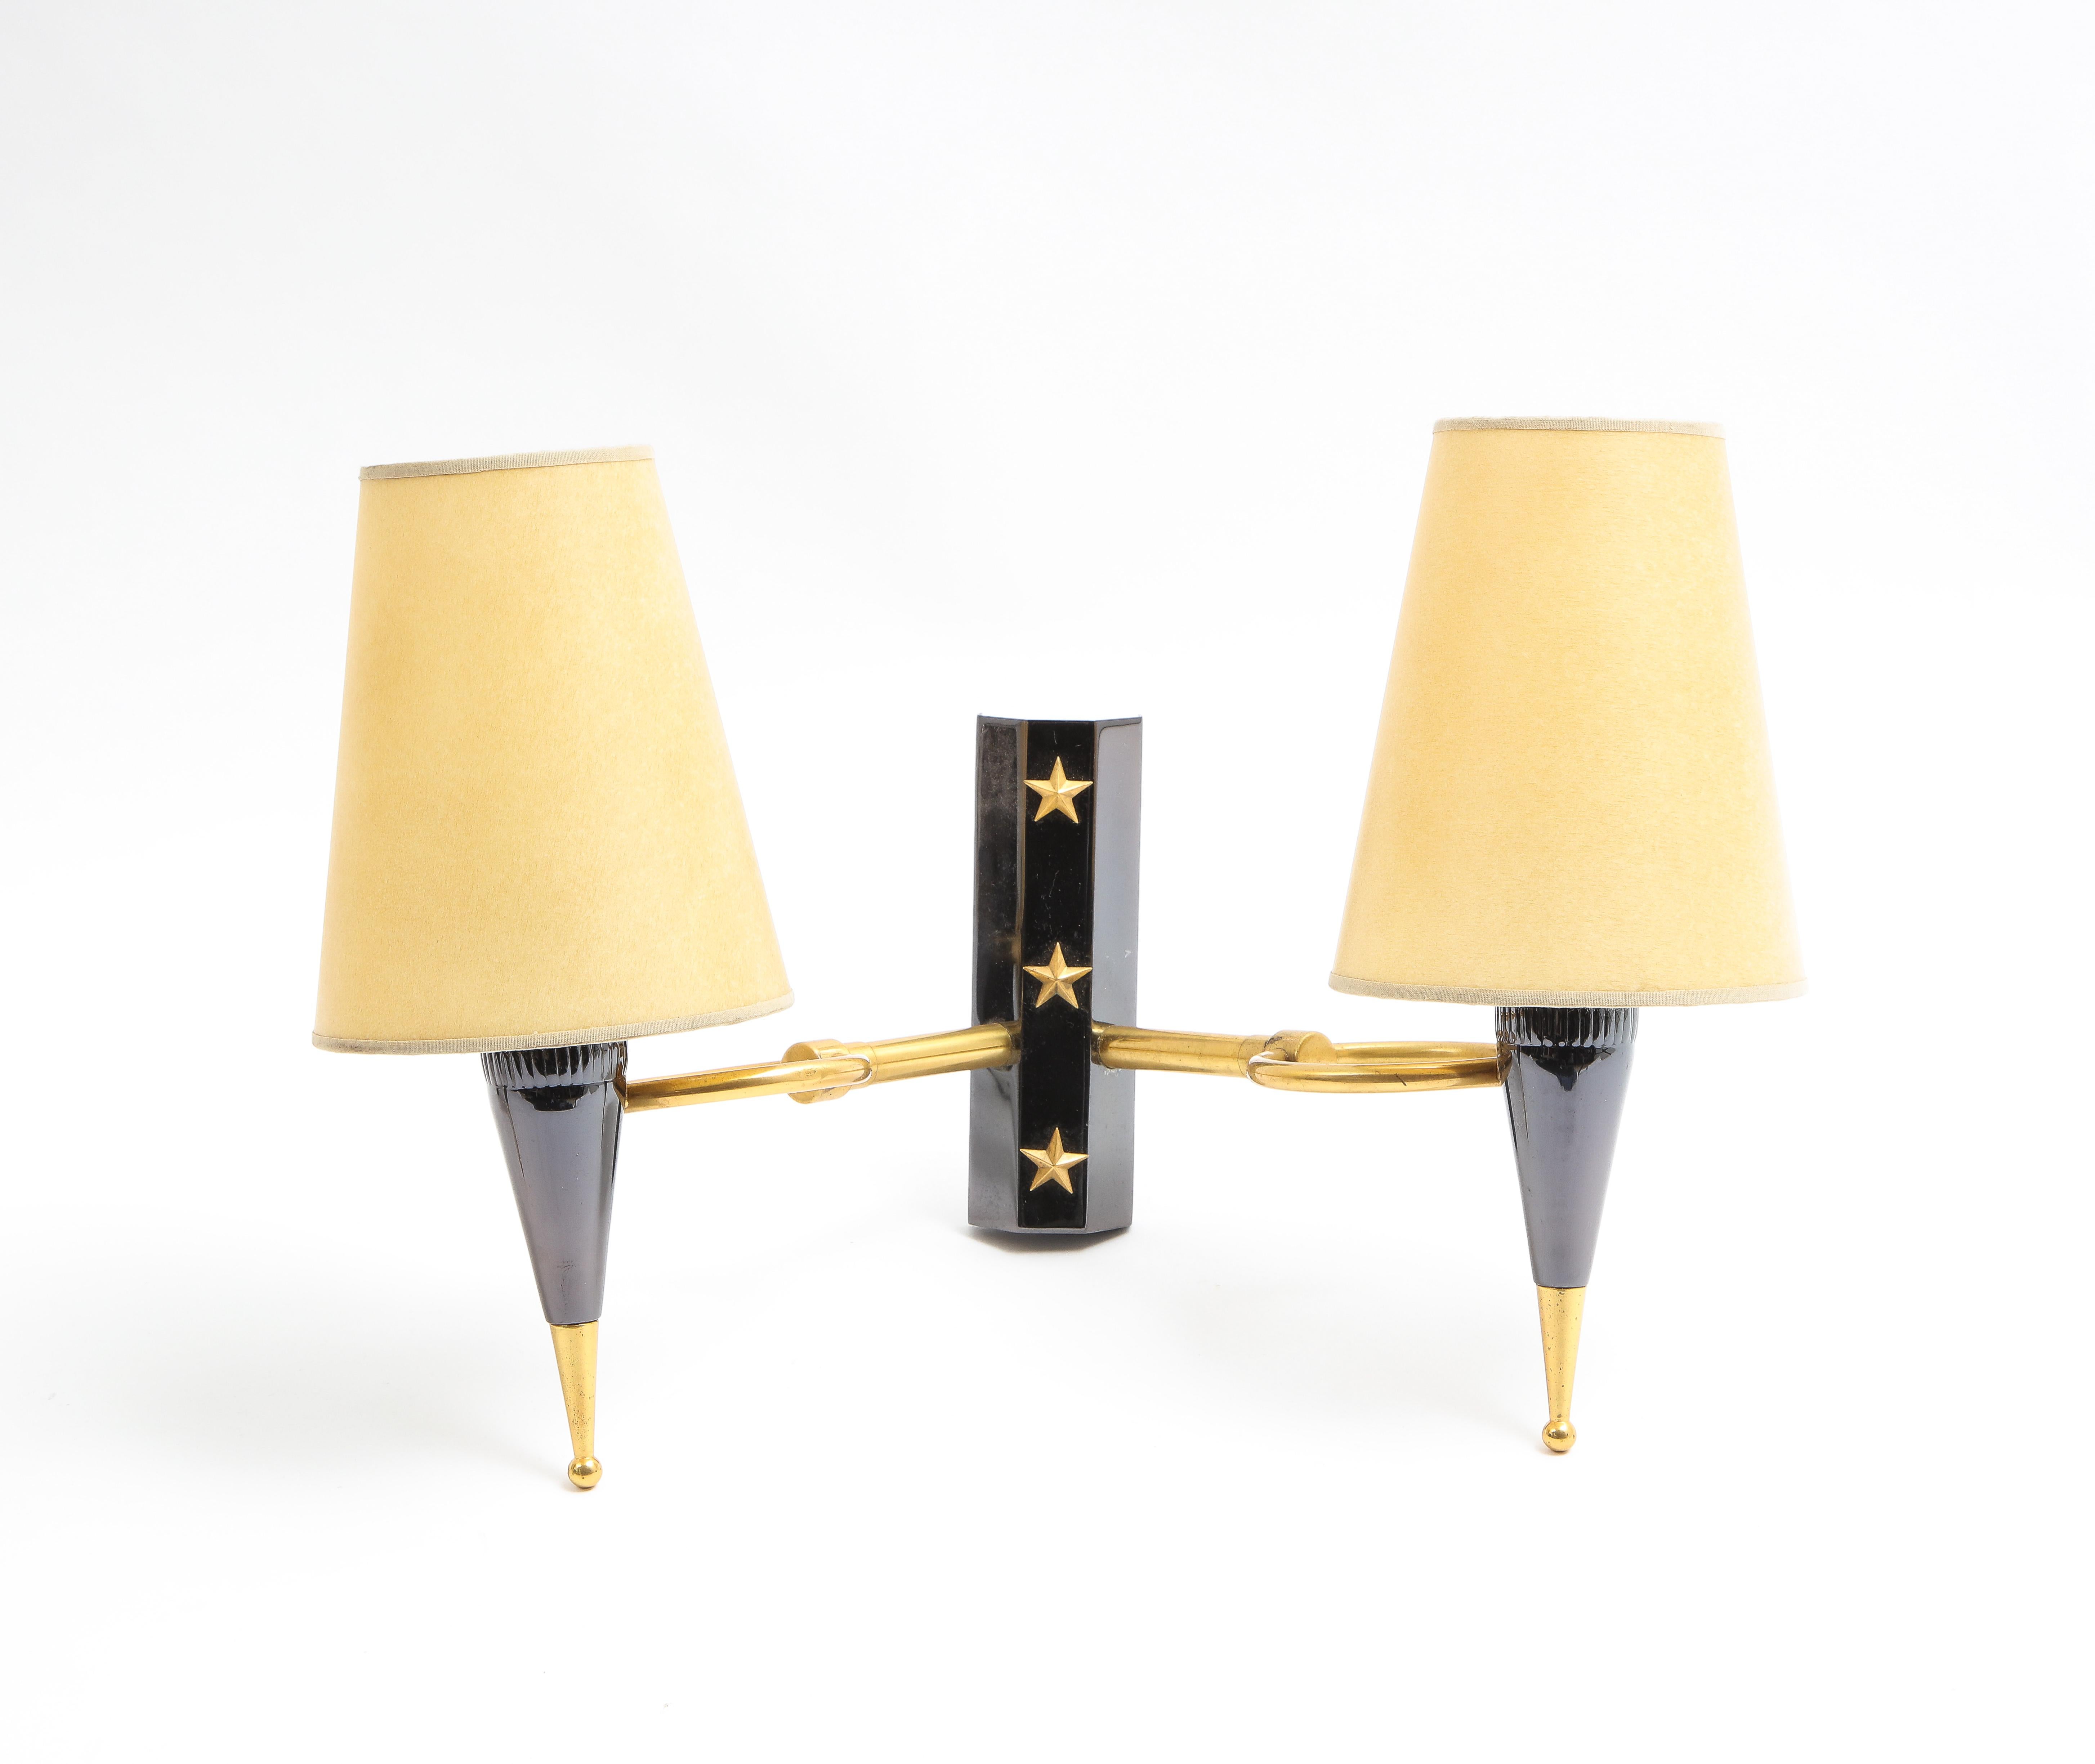 Pair of 2 lights sconces in gunmetal and brass, the light sockets are held in place by brass rings. 
Rewired.